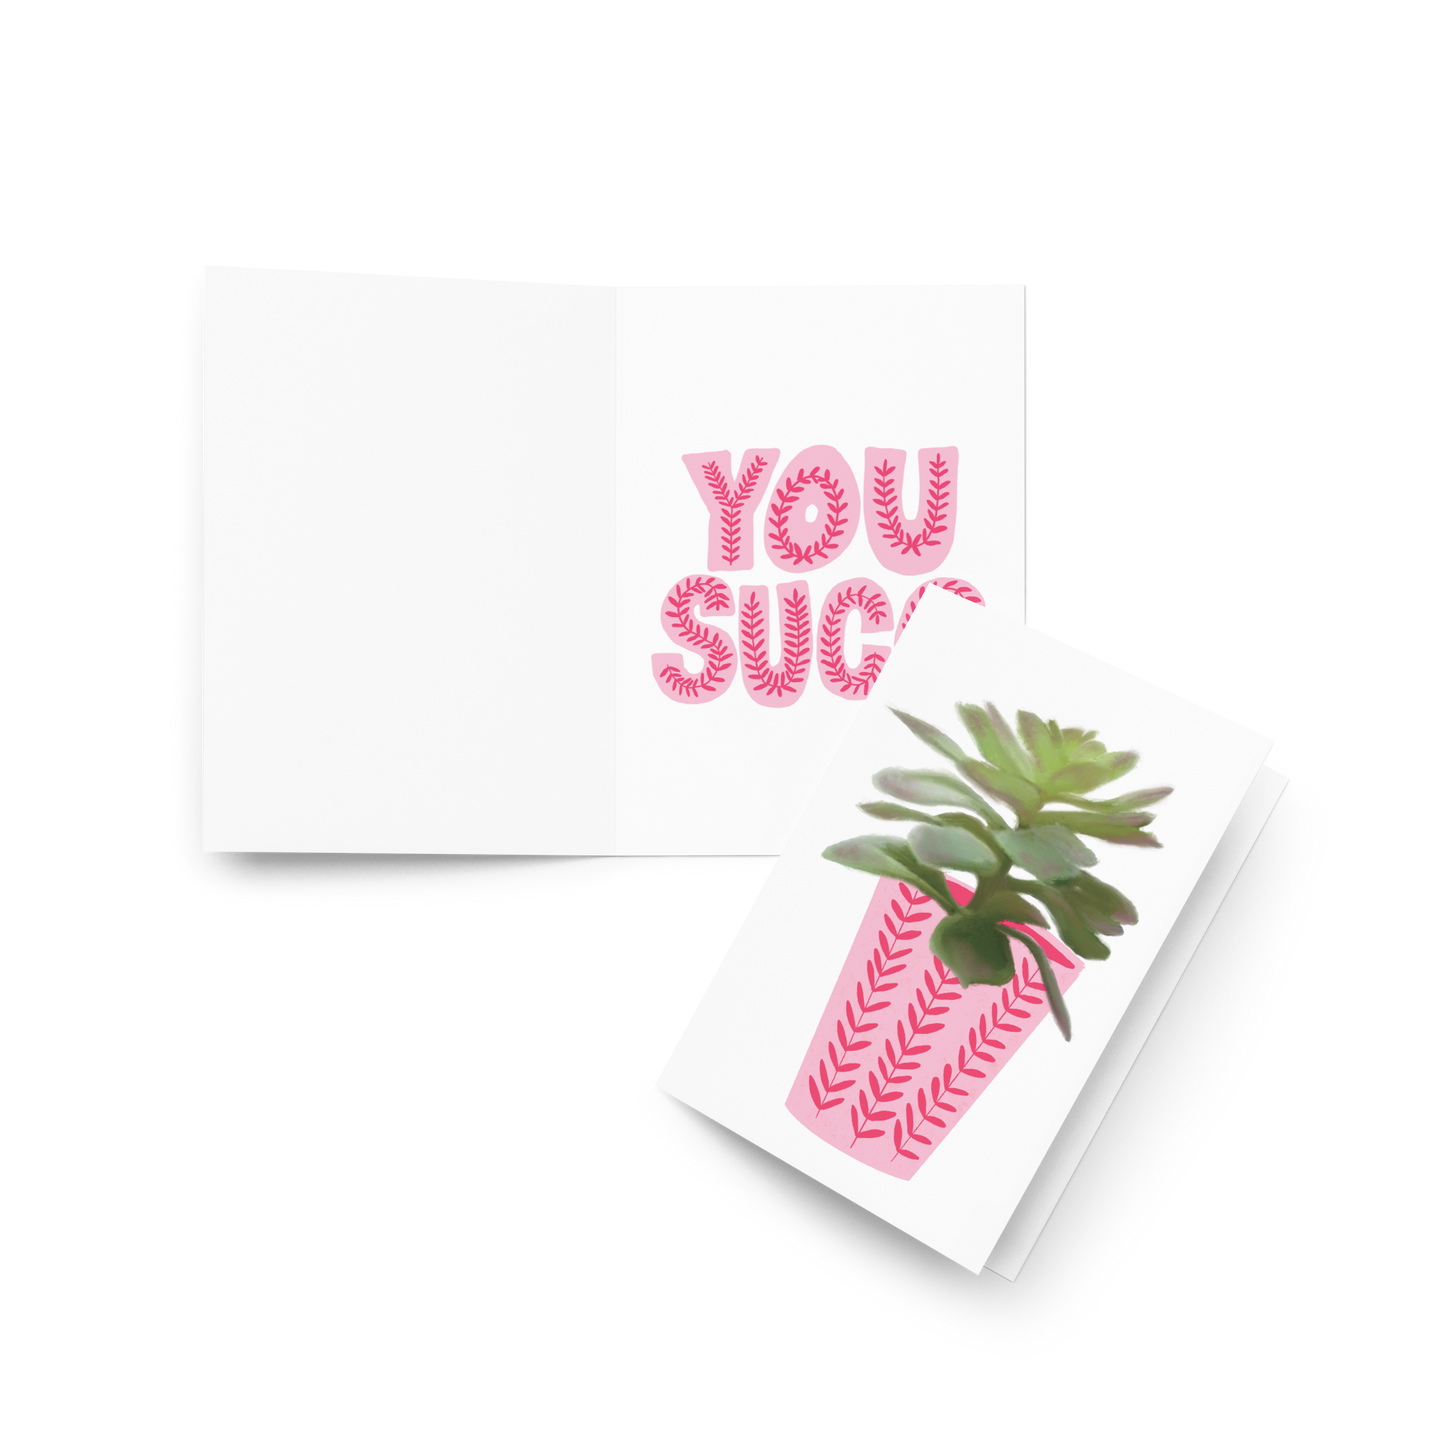 Succulent Card / Anti-Greeting Card / You Succ Card / Funny Birthday Card / Funny Plant Card / Gifts for Plant Lovers